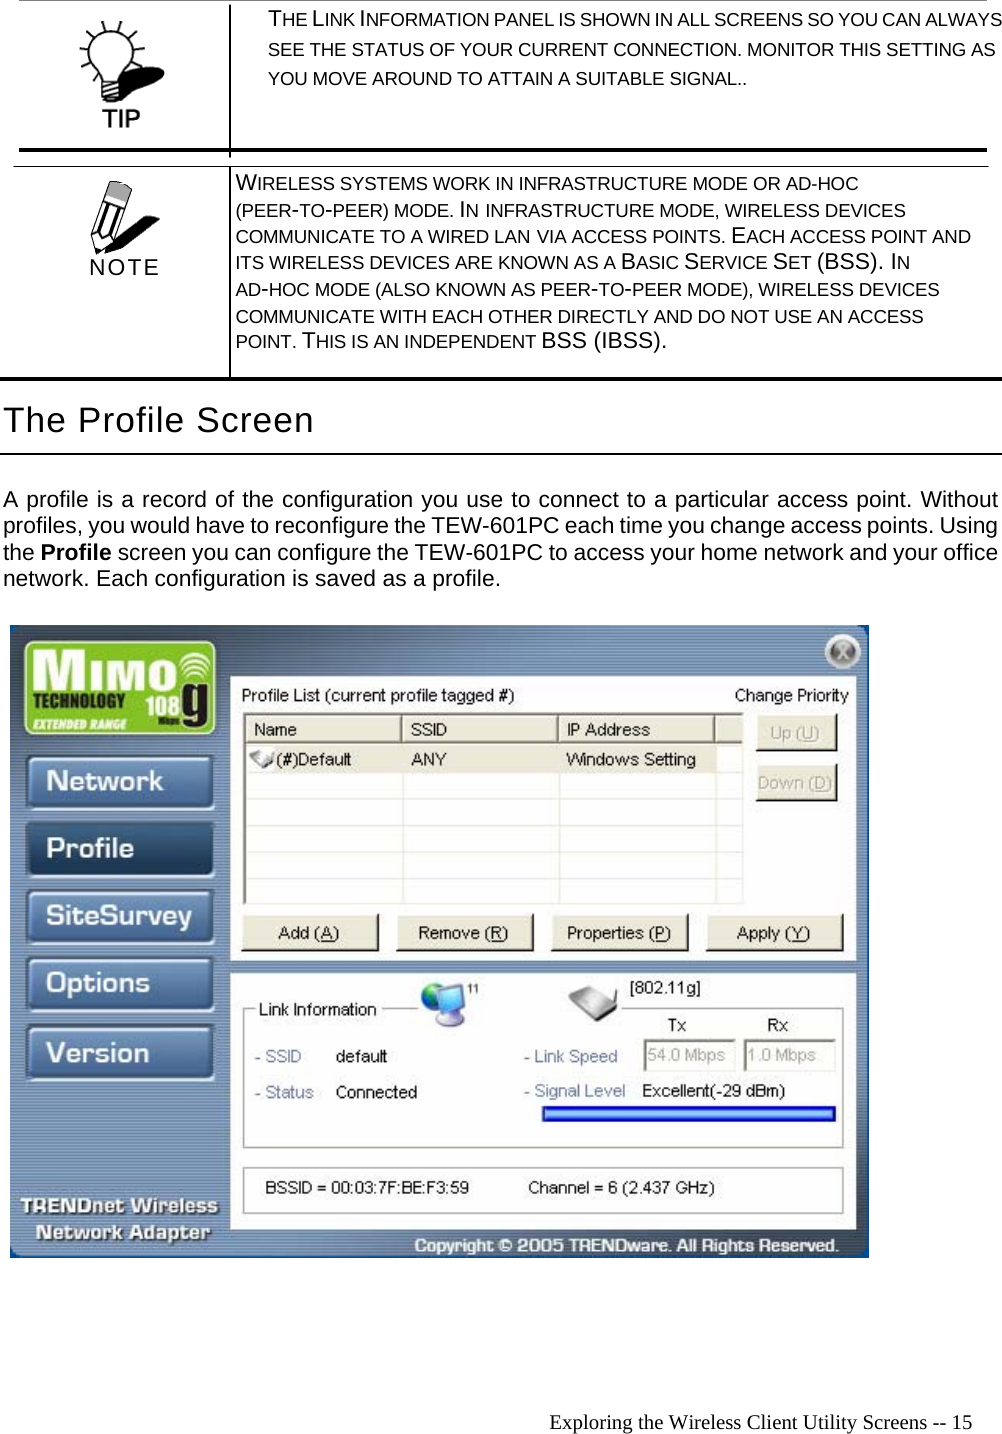   Exploring the Wireless Client Utility Screens -- 15  THE LINK INFORMATION PANEL IS SHOWN IN ALL SCREENS SO YOU CAN ALWAYS SEE THE STATUS OF YOUR CURRENT CONNECTION. MONITOR THIS SETTING AS  YOU MOVE AROUND TO ATTAIN A SUITABLE SIGNAL.. The Profile Screen A profile is a record of the configuration you use to connect to a particular access point. Without profiles, you would have to reconfigure the TEW-601PC each time you change access points. Using the Profile screen you can configure the TEW-601PC to access your home network and your office network. Each configuration is saved as a profile.    WIRELESS SYSTEMS WORK IN INFRASTRUCTURE MODE OR AD-HOC (PEER-TO-PEER) MODE. IN INFRASTRUCTURE MODE, WIRELESS DEVICES COMMUNICATE TO A WIRED LAN VIA ACCESS POINTS. EACH ACCESS POINT AND ITS WIRELESS DEVICES ARE KNOWN AS A BASIC SERVICE SET (BSS). IN AD-HOC MODE (ALSO KNOWN AS PEER-TO-PEER MODE), WIRELESS DEVICES COMMUNICATE WITH EACH OTHER DIRECTLY AND DO NOT USE AN ACCESS POINT. THIS IS AN INDEPENDENT BSS (IBSS).  NOTE 